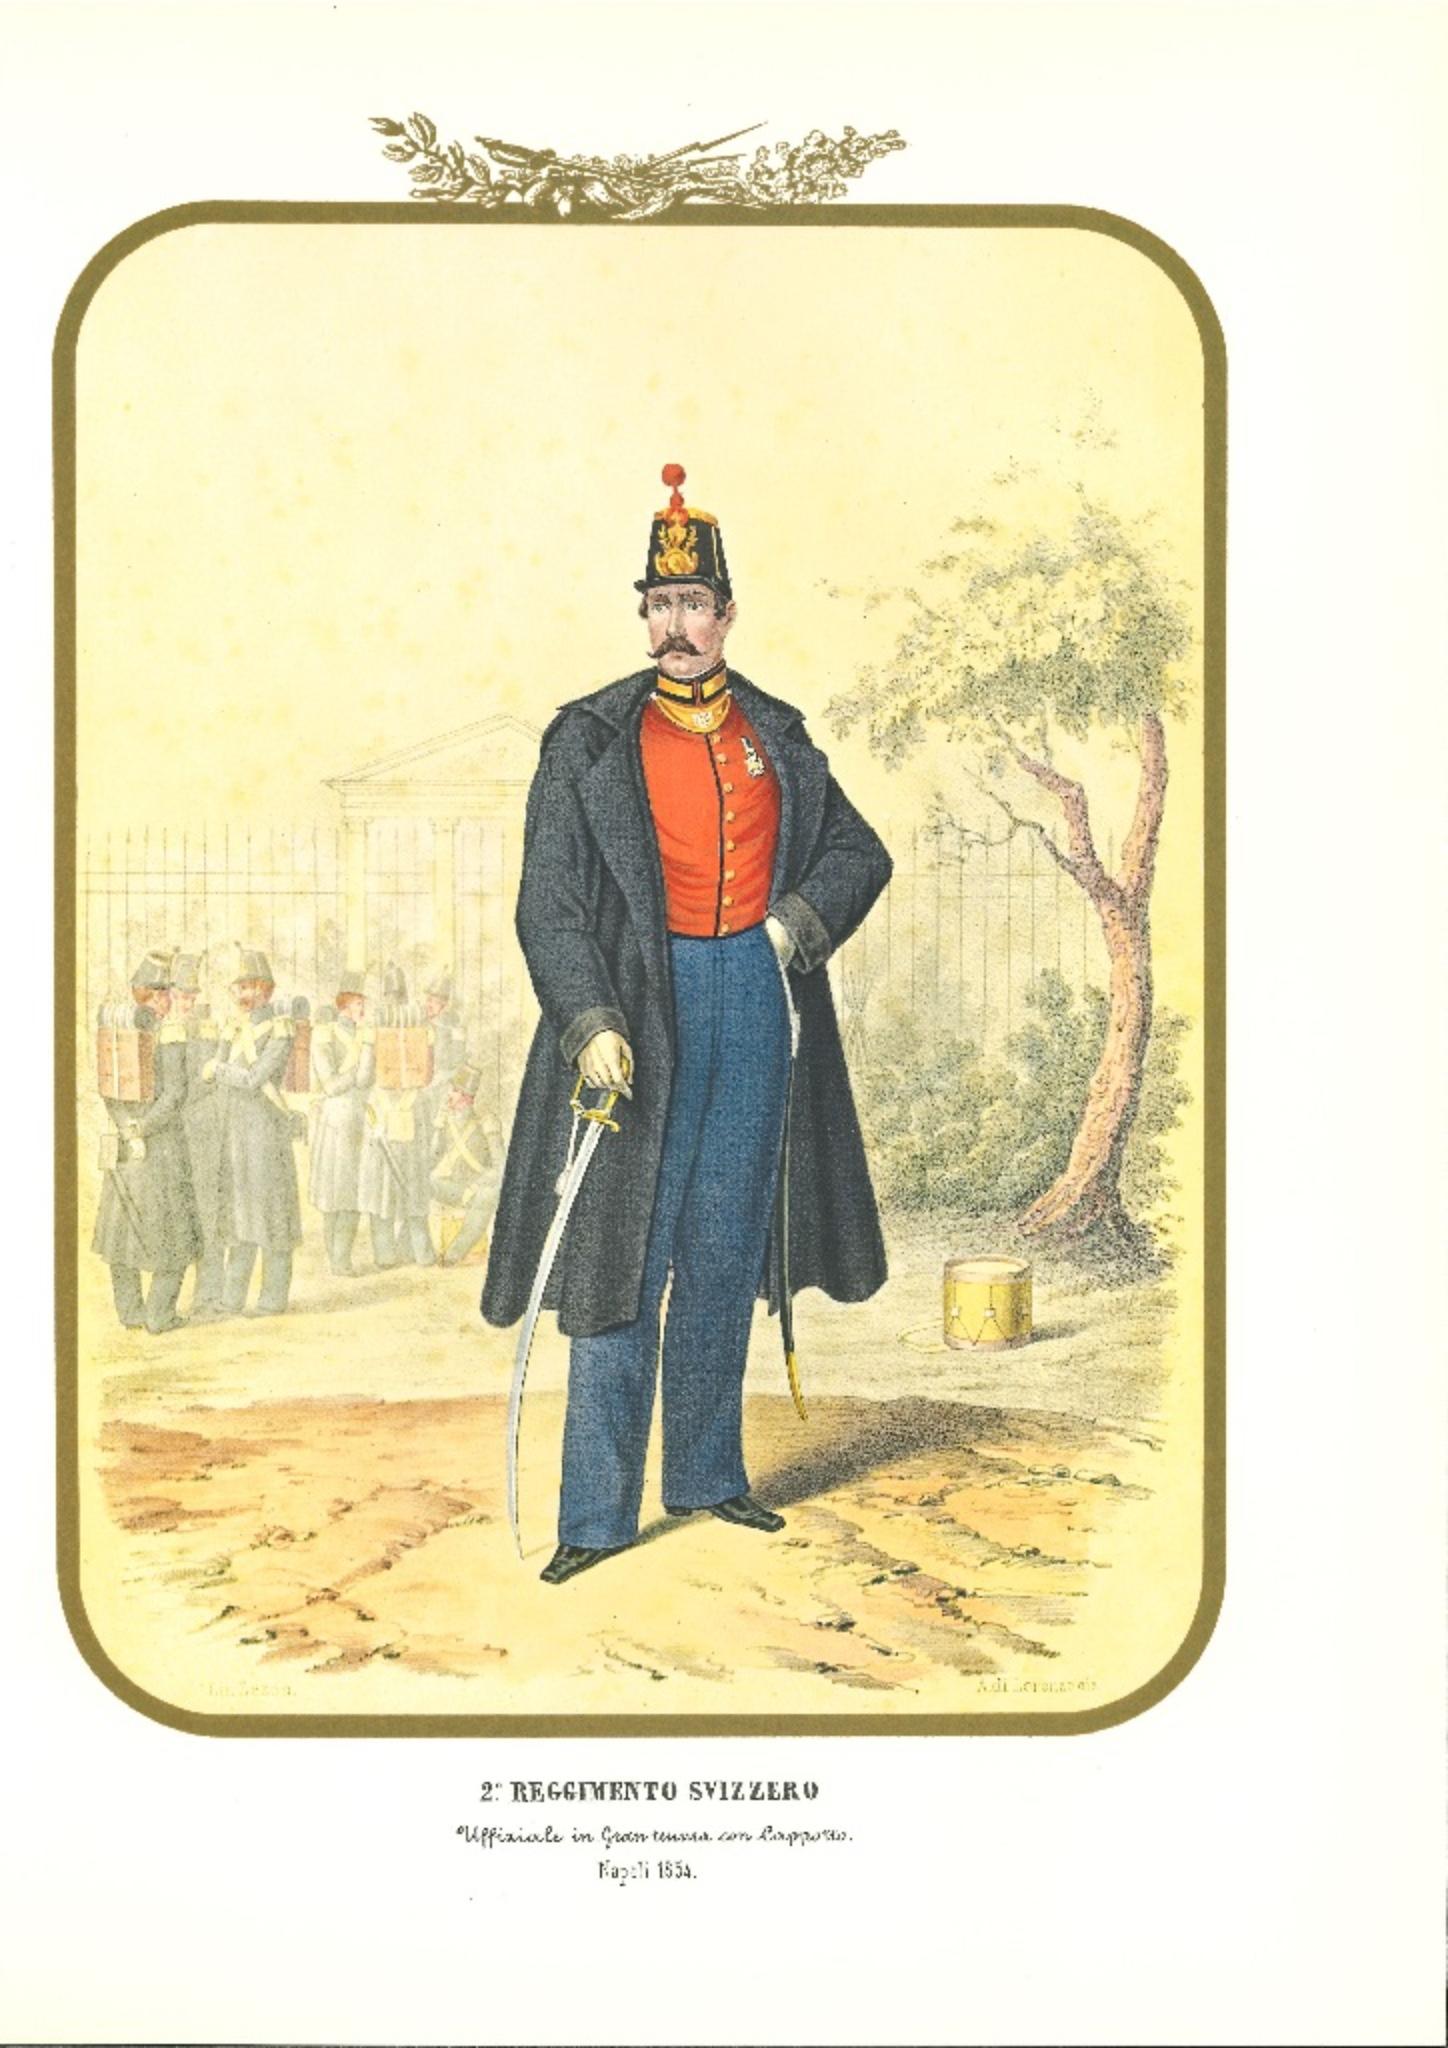 Swiss Regiment is an original lithograph by Antonio Zezon. Naples 1854.

Interesting colored lithograph which describes some members of the Swiss Regiment: In the foreground an Officer in full dress with a coat and other members of the Army in the